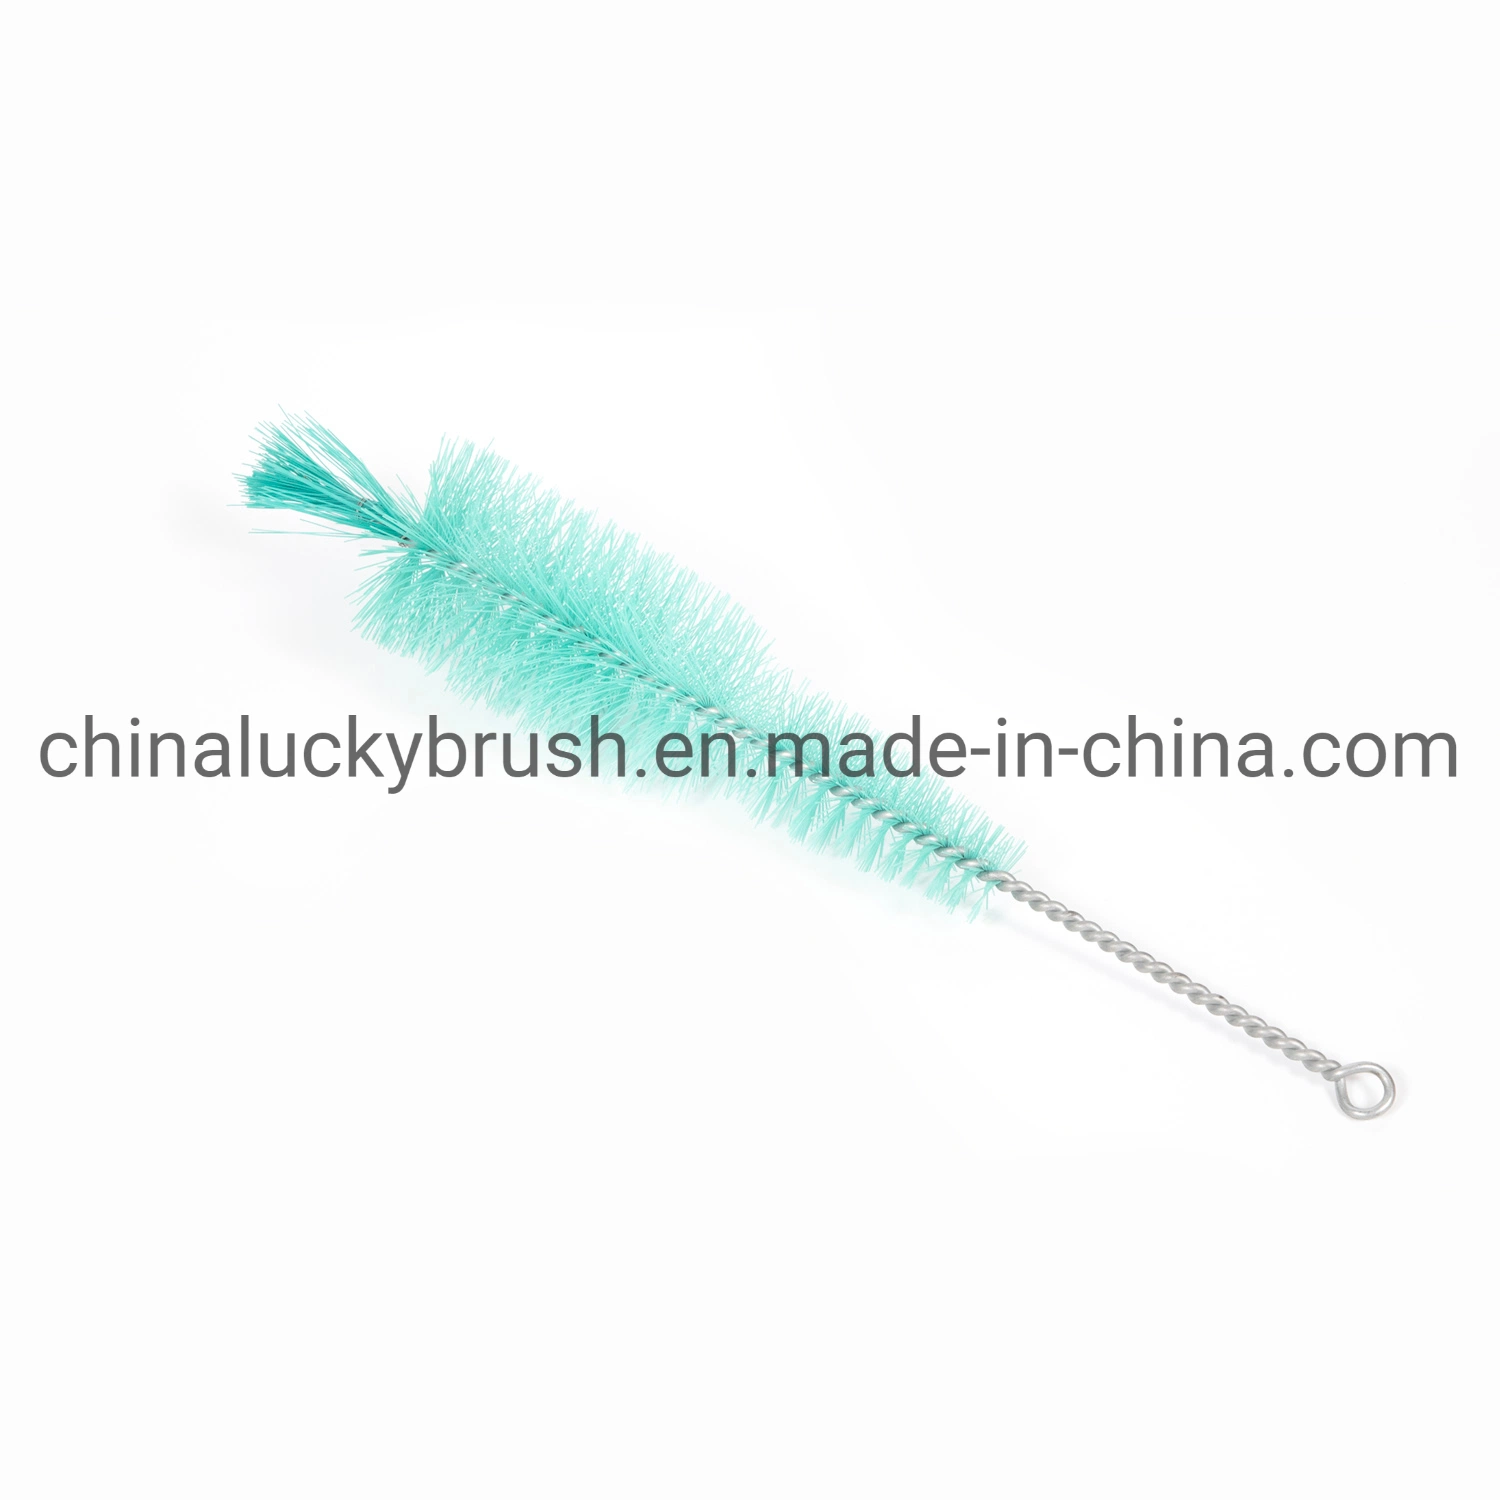 Nylon Cleaning Brush for Pipe/Orifile/Bottle/Glass/Hand Tool/Electric Tool/Mould Cleaning Deburring Rust Removal Brush (YY-986)